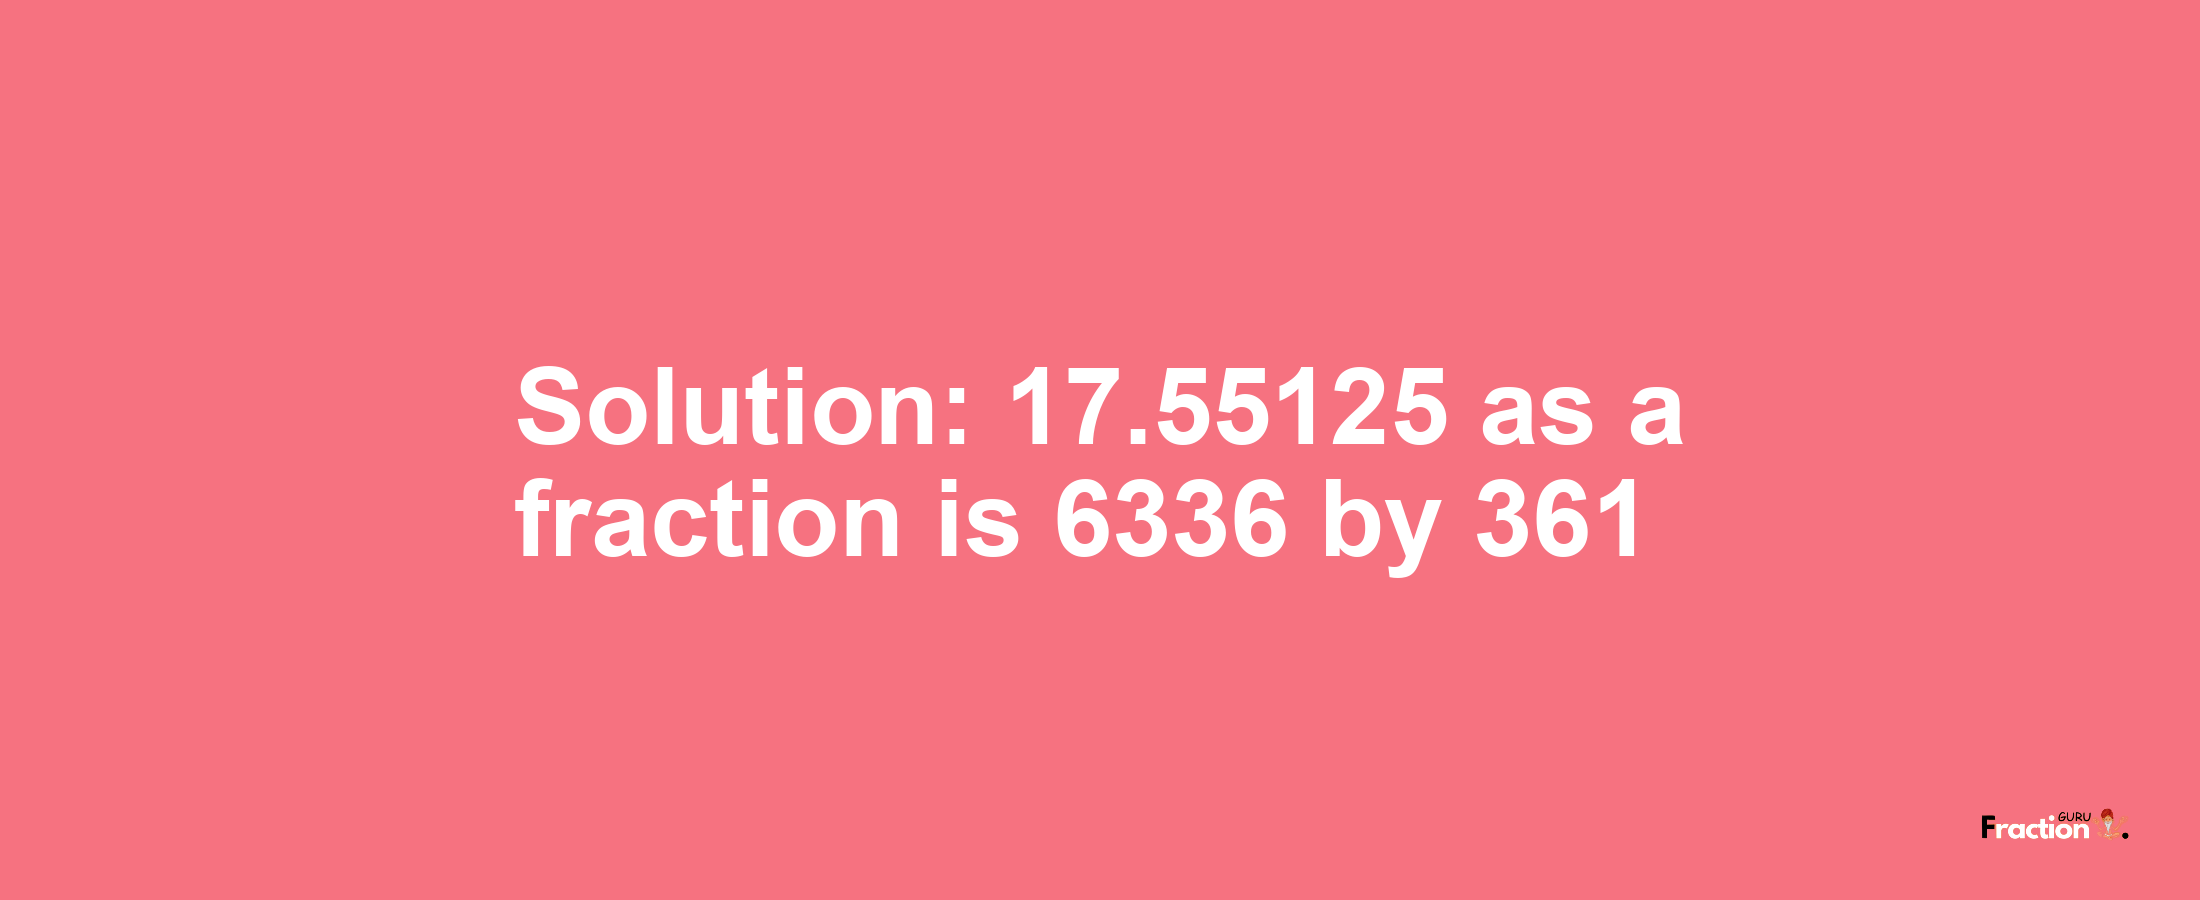 Solution:17.55125 as a fraction is 6336/361